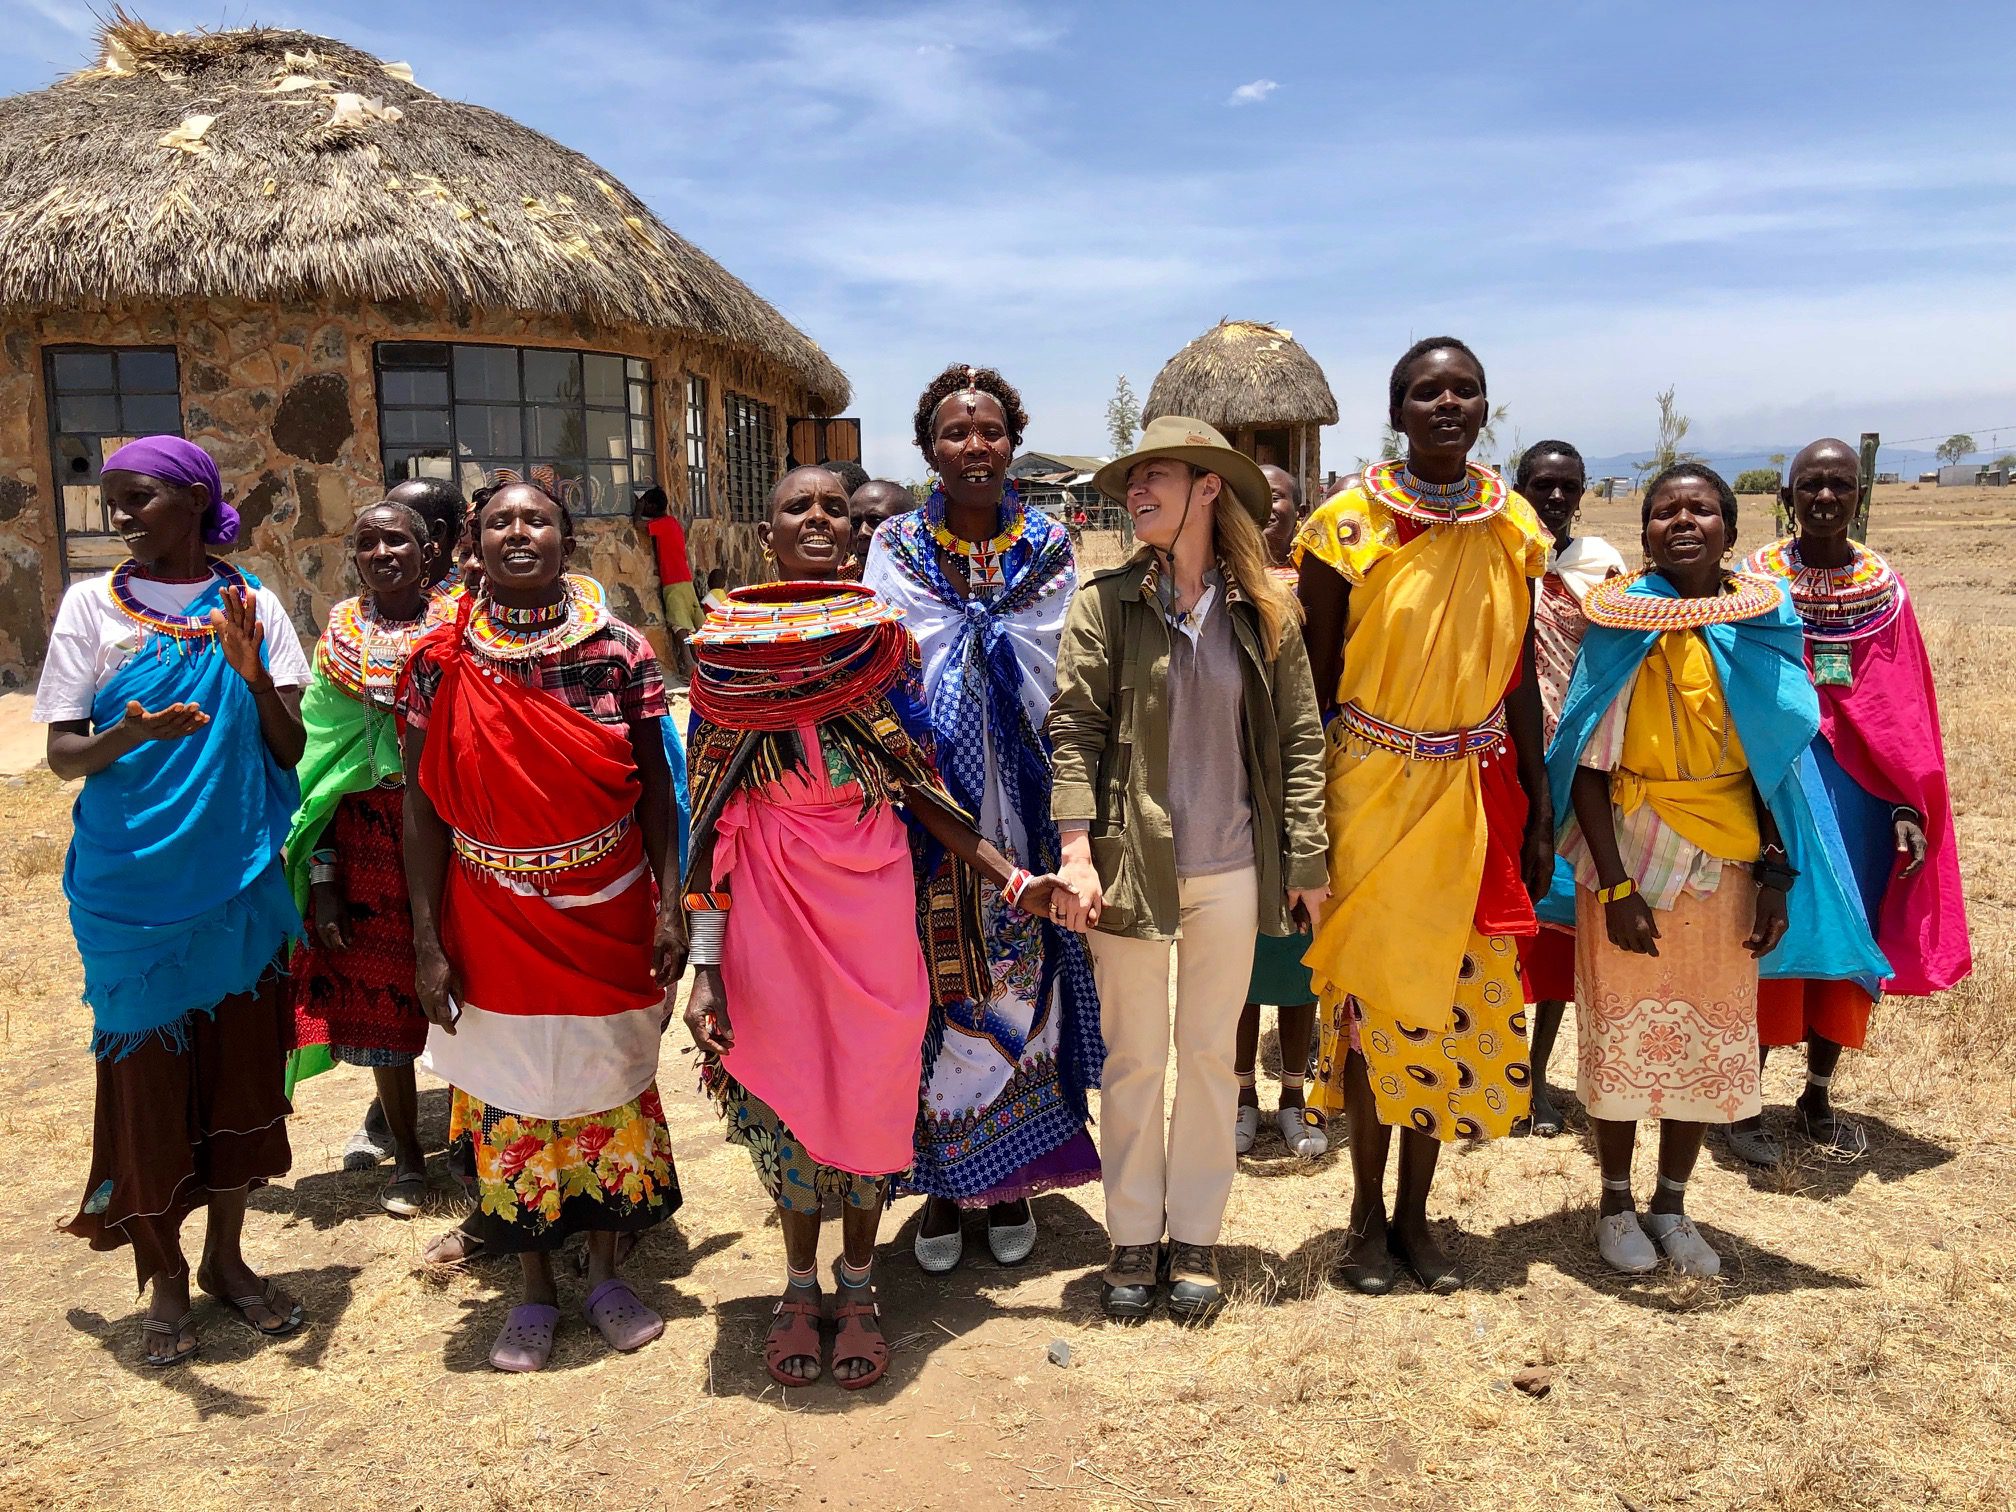 Indagare Travel founder and CEO Melissa Biggs Bradley with members of the Maasai tribe in Kenya in 2018. Indagare hires in-house specialists who design highly customized travel experiences.